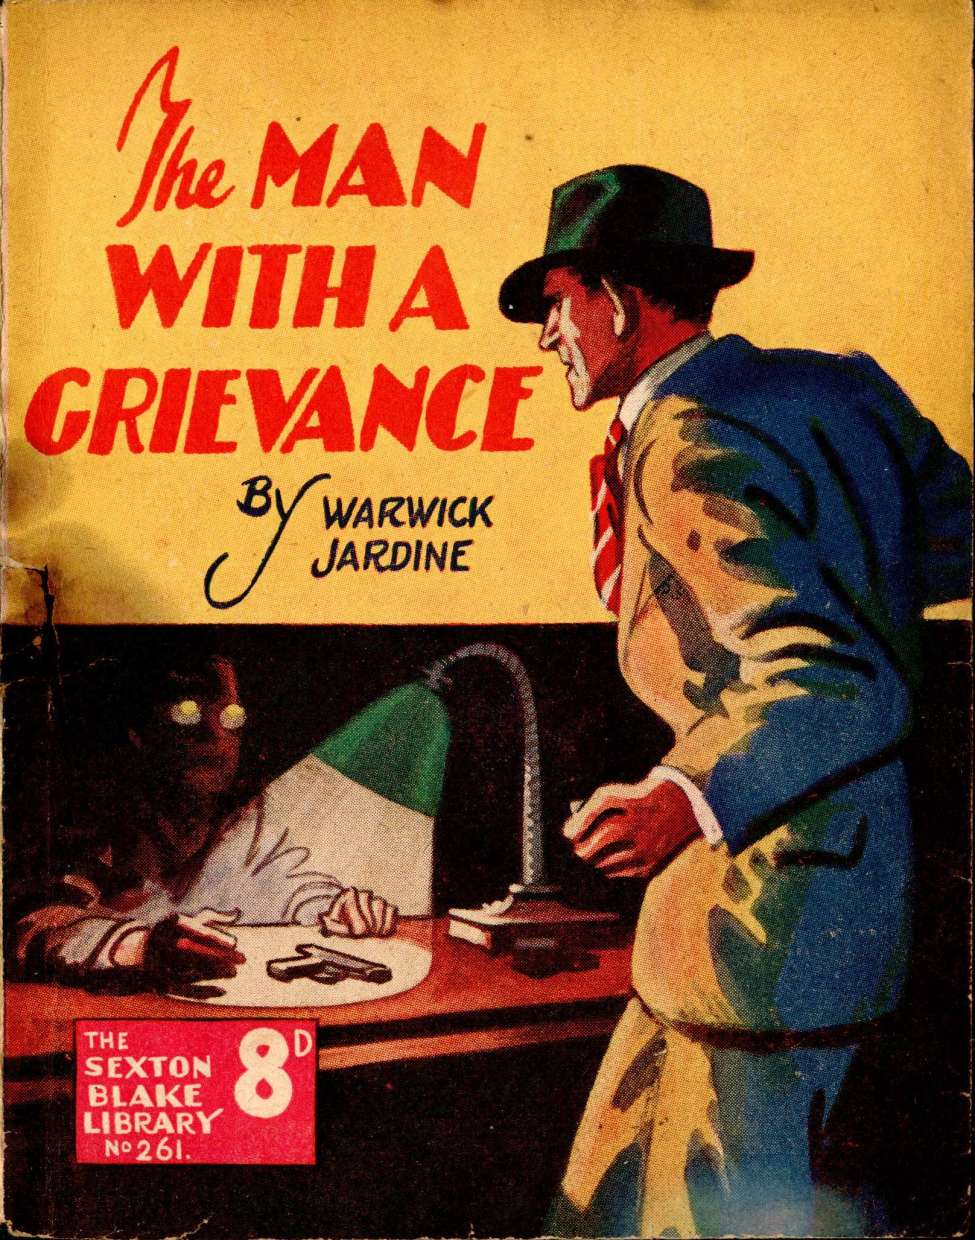 Comic Book Cover For Sexton Blake Library S3 261 - The Man with a Grievance